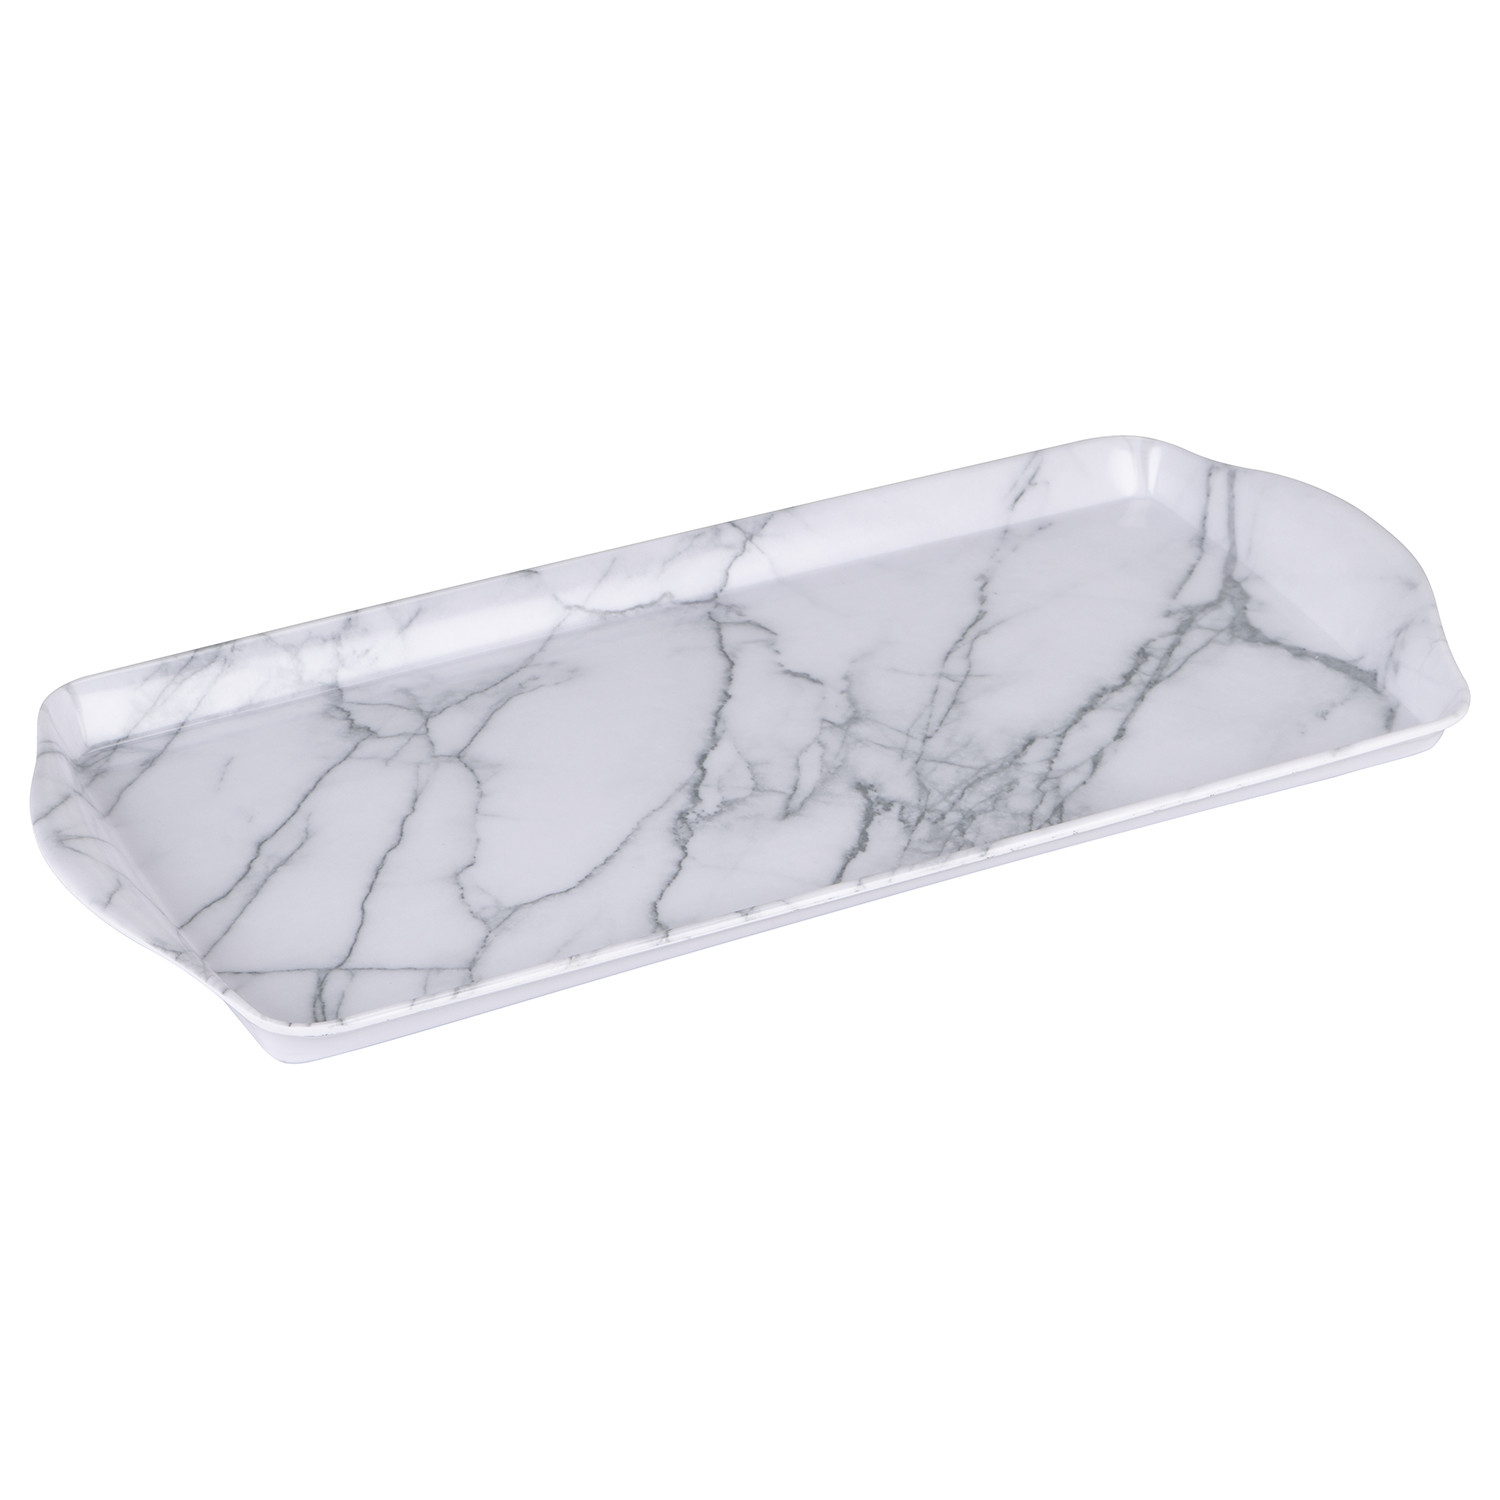 White Marble Long Drinks Serving Tray Image 2